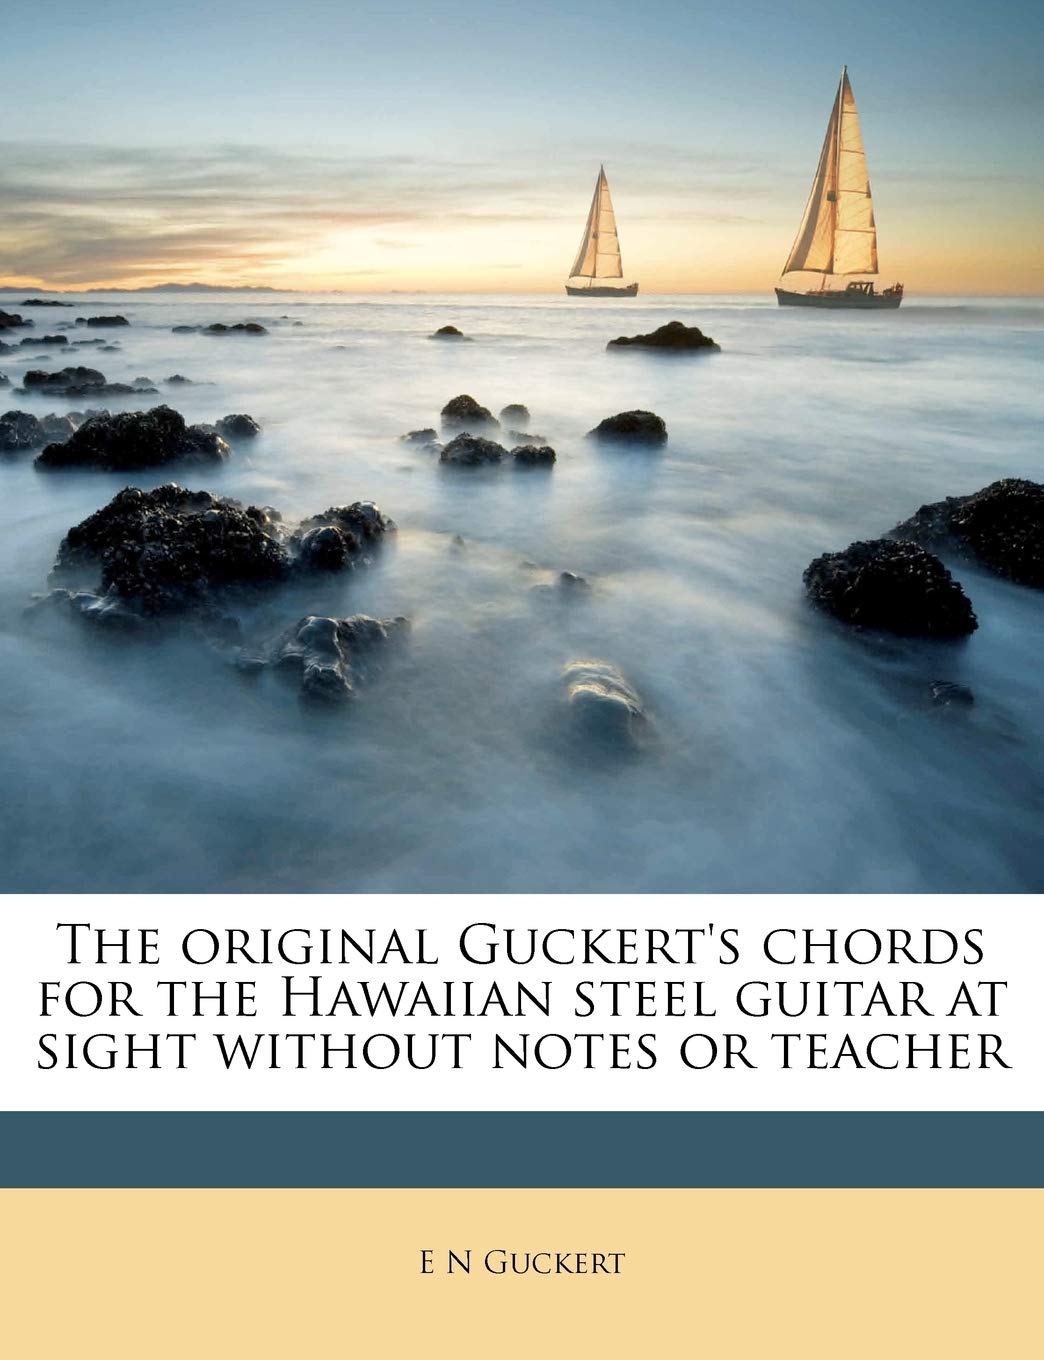 The original Guckert's chords for the Hawaiian steel guitar at sight without notes or teacher